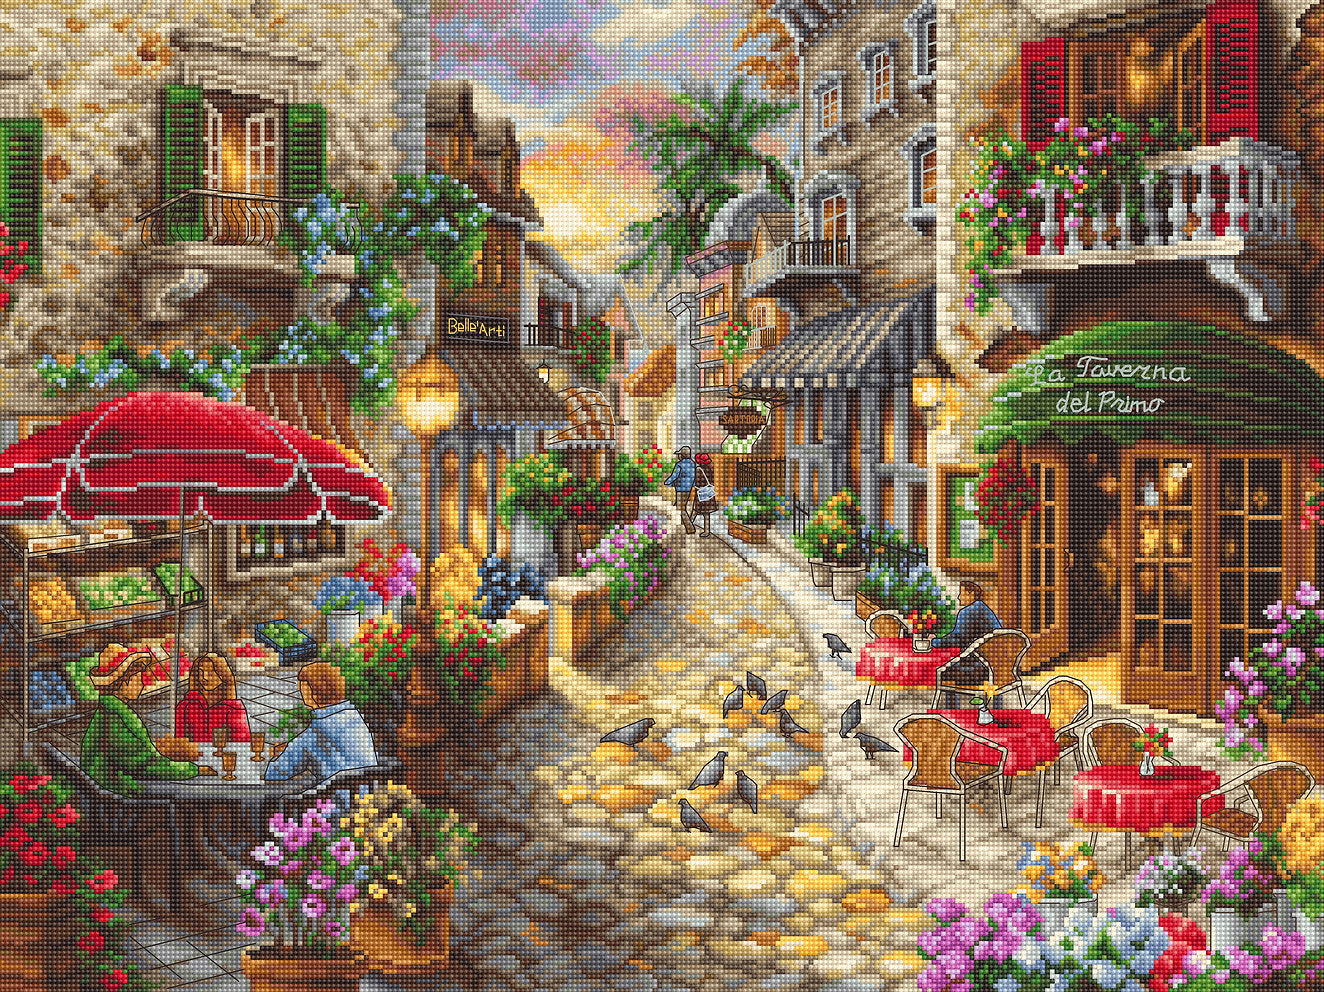 Early Evening in Avola - L8021 LETISTITCH - Cross Stitch Kit